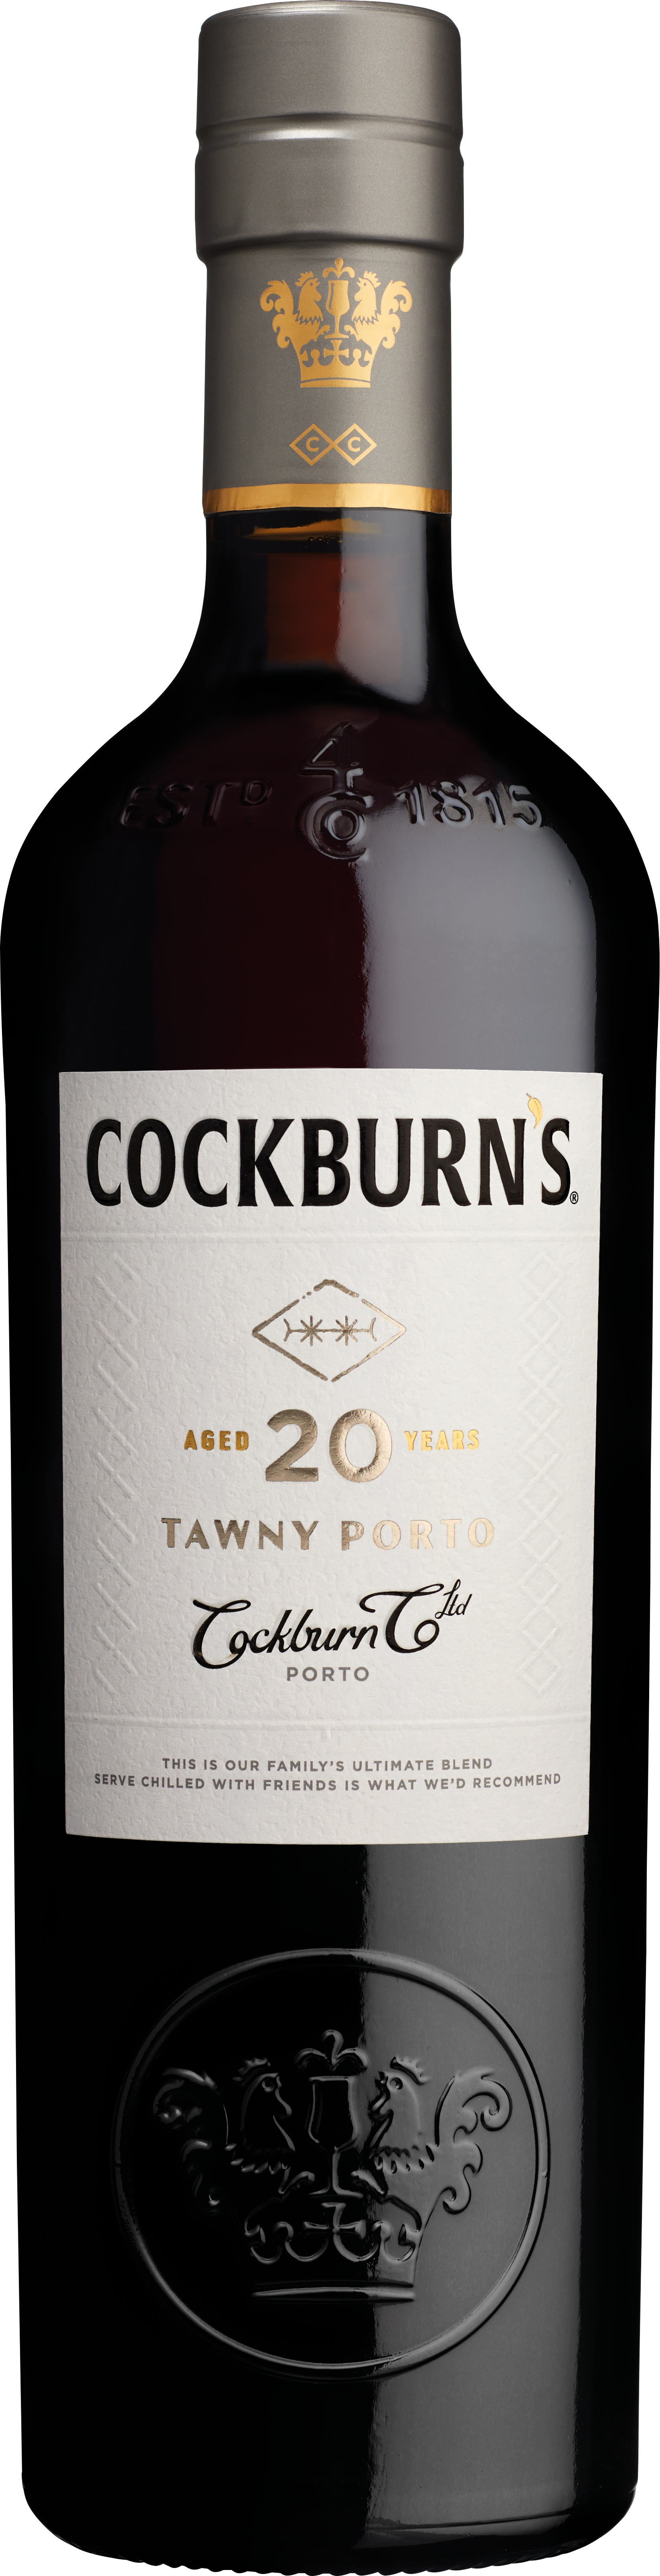 Product Image for COCKBURN'S 20 YEAR OLD TAWNY PORT